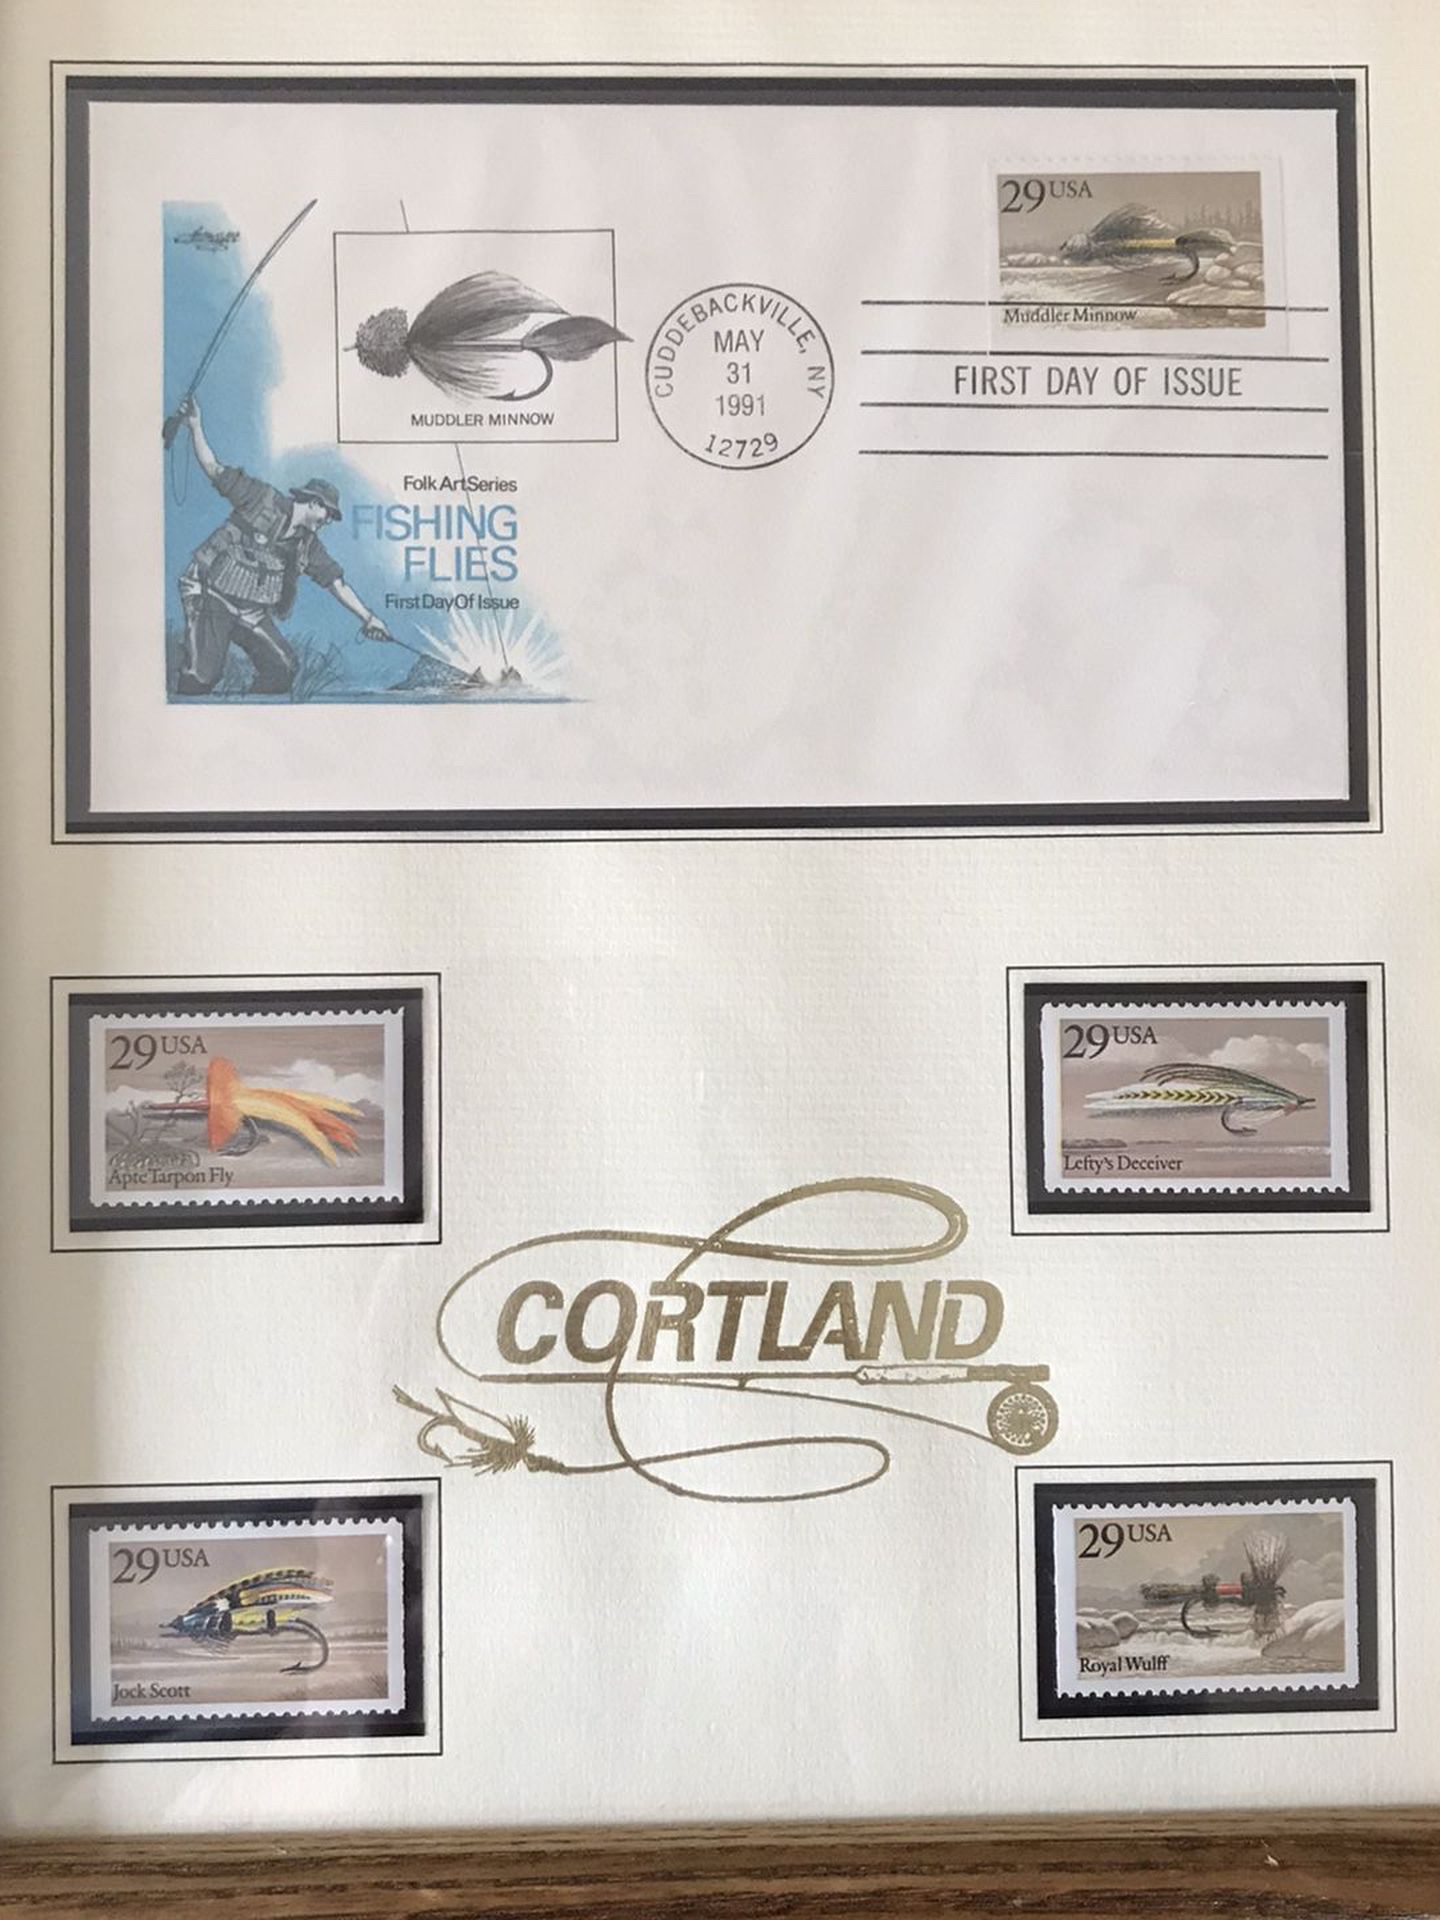 Cortland Fly fishing Stamps 1991